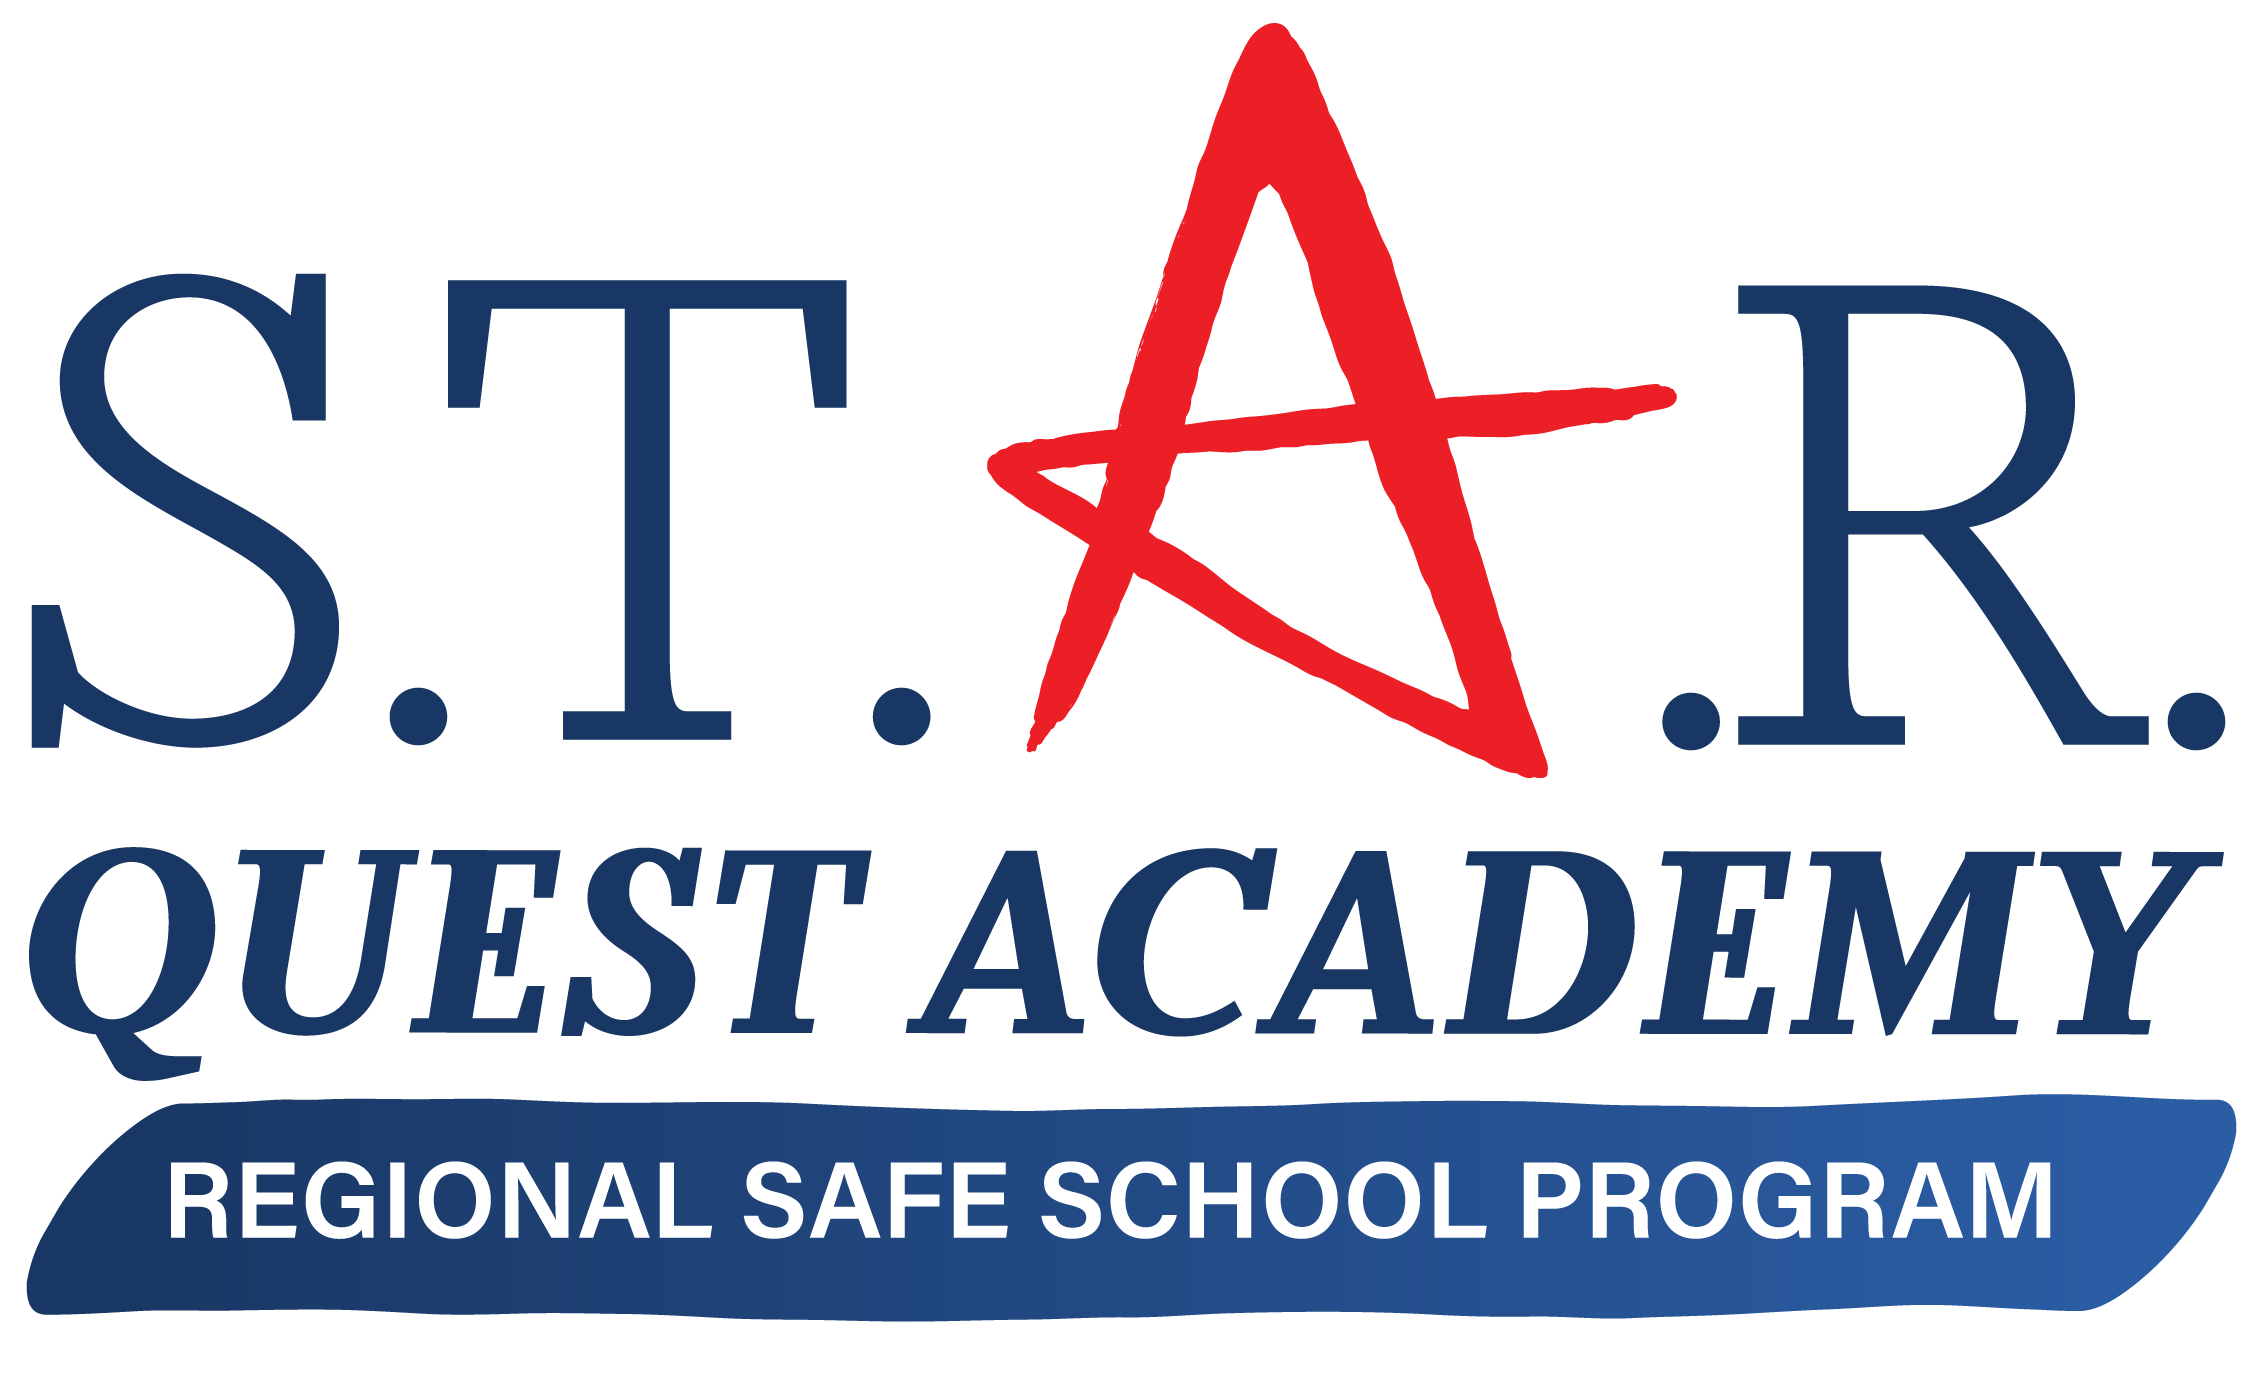 S.T.A.R. Quest Academy